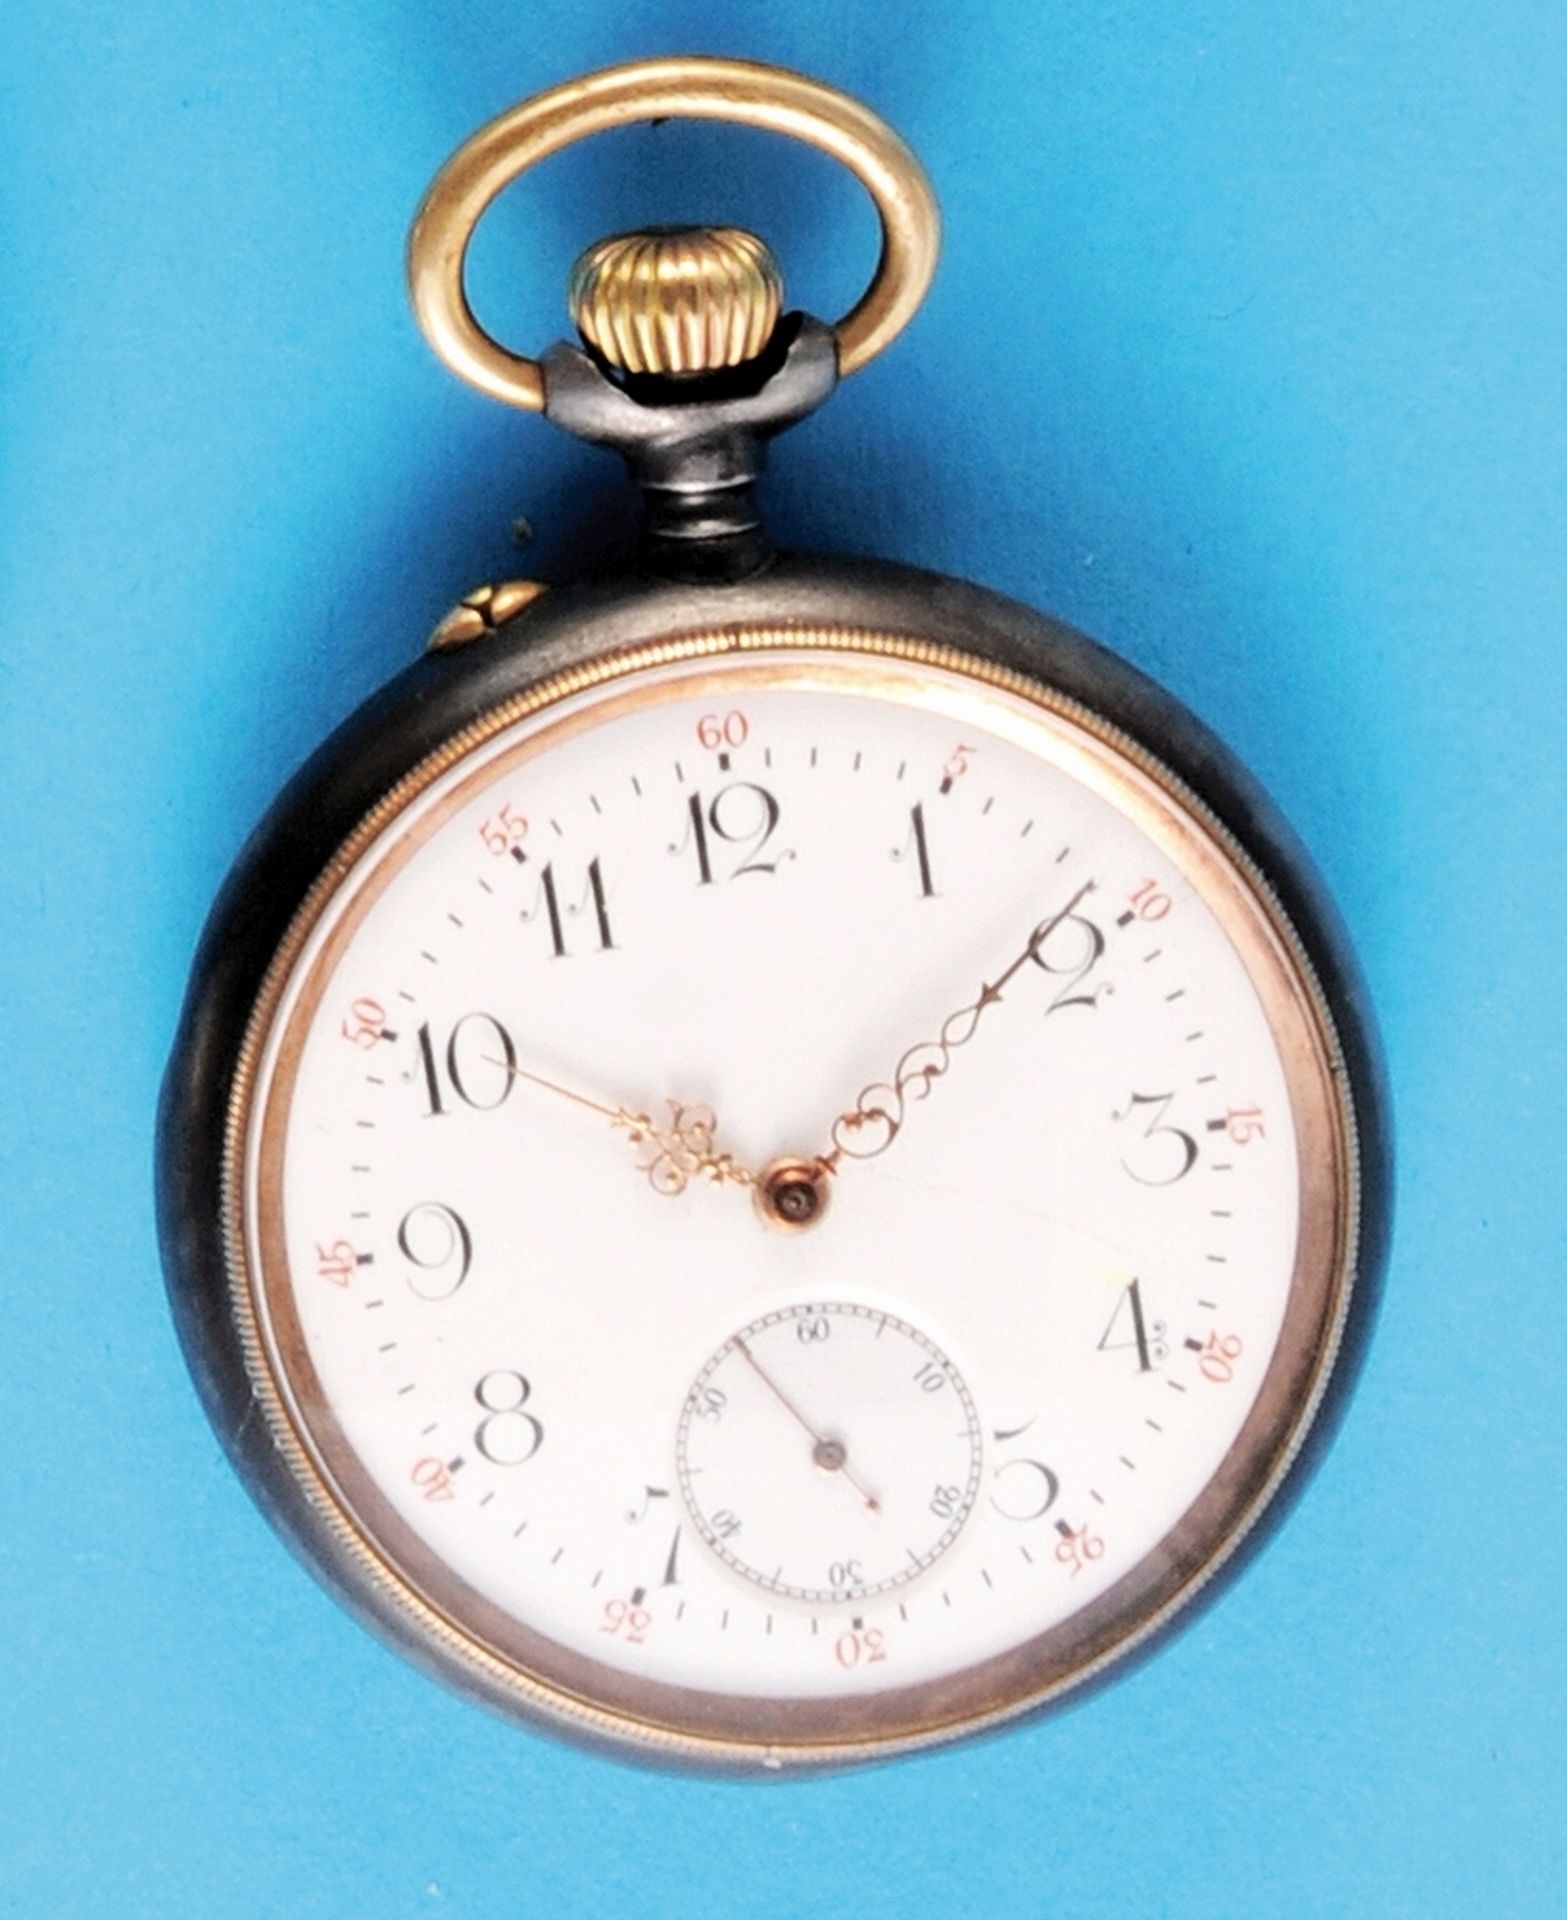 Burnished metal pocket watch with case patent, patent no. 4001, with patent specification in copy, - Bild 2 aus 2